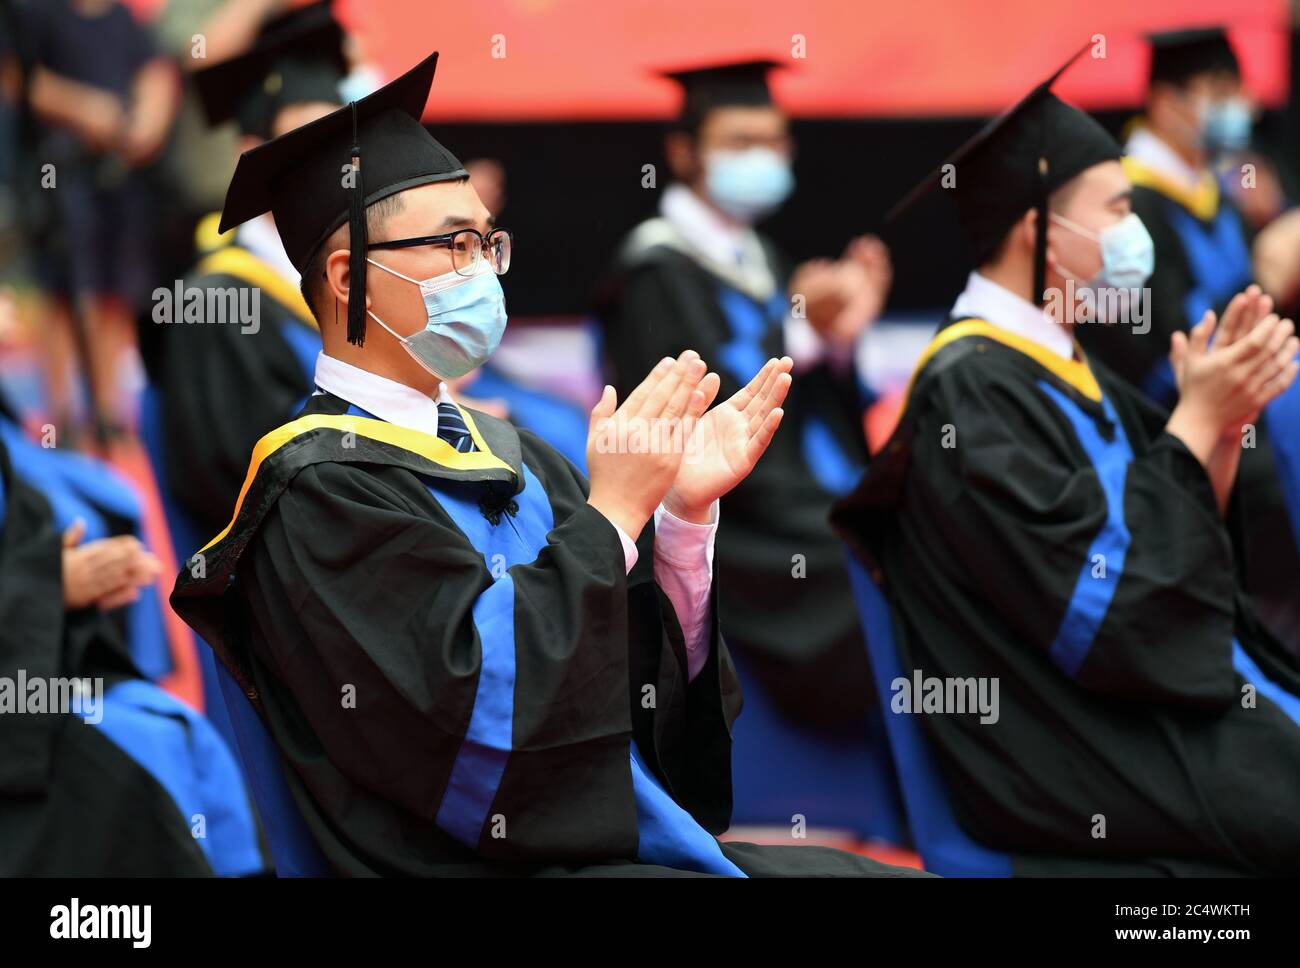 Beijing, China. 29th June, 2020. Graduates attend the commencement ceremony at Beihang University in Beijing, capital of China, June 29, 2020. Beihang University held a commencement ceremony for the Class of 2020 (Bachelor's Degrees) on Monday. In order to reduce the risk of infection of COVID-19, only a minority of graduates attended the ceremony on site with the others attending online. Credit: Ren Chao/Xinhua/Alamy Live News Stock Photo